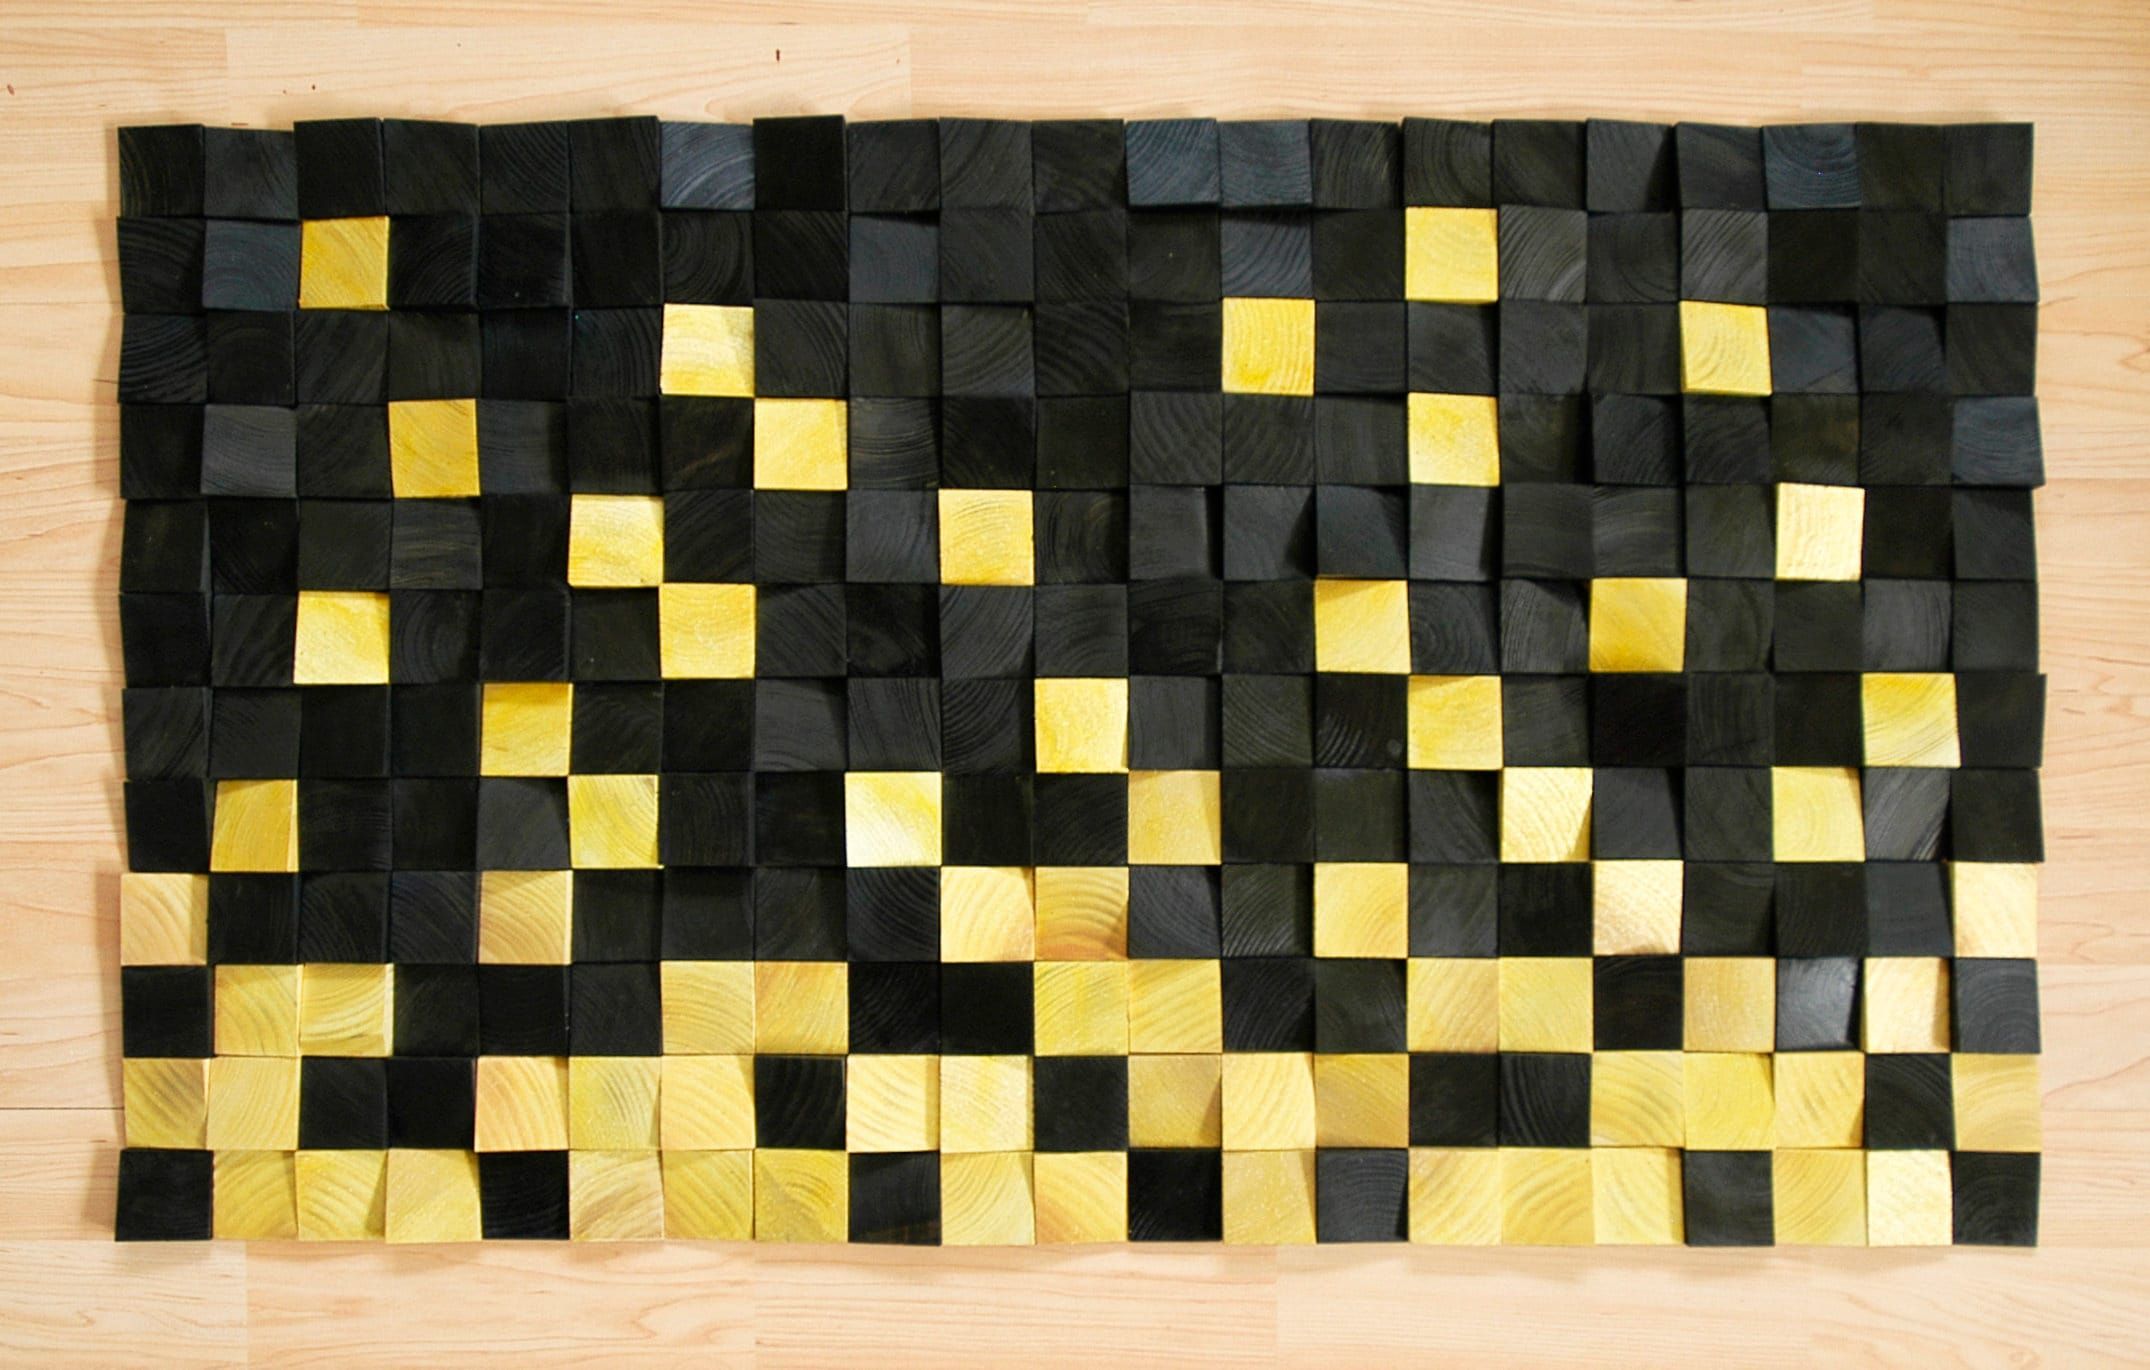 Gold And Black Wall Art, Wood Wall Decor, Wooden Mosaic, Abstract Wood Art, Wall  Hanging, 3d Wall Art, Sound Diffuser Within Most Current Black Wood Wall Art (View 15 of 20)